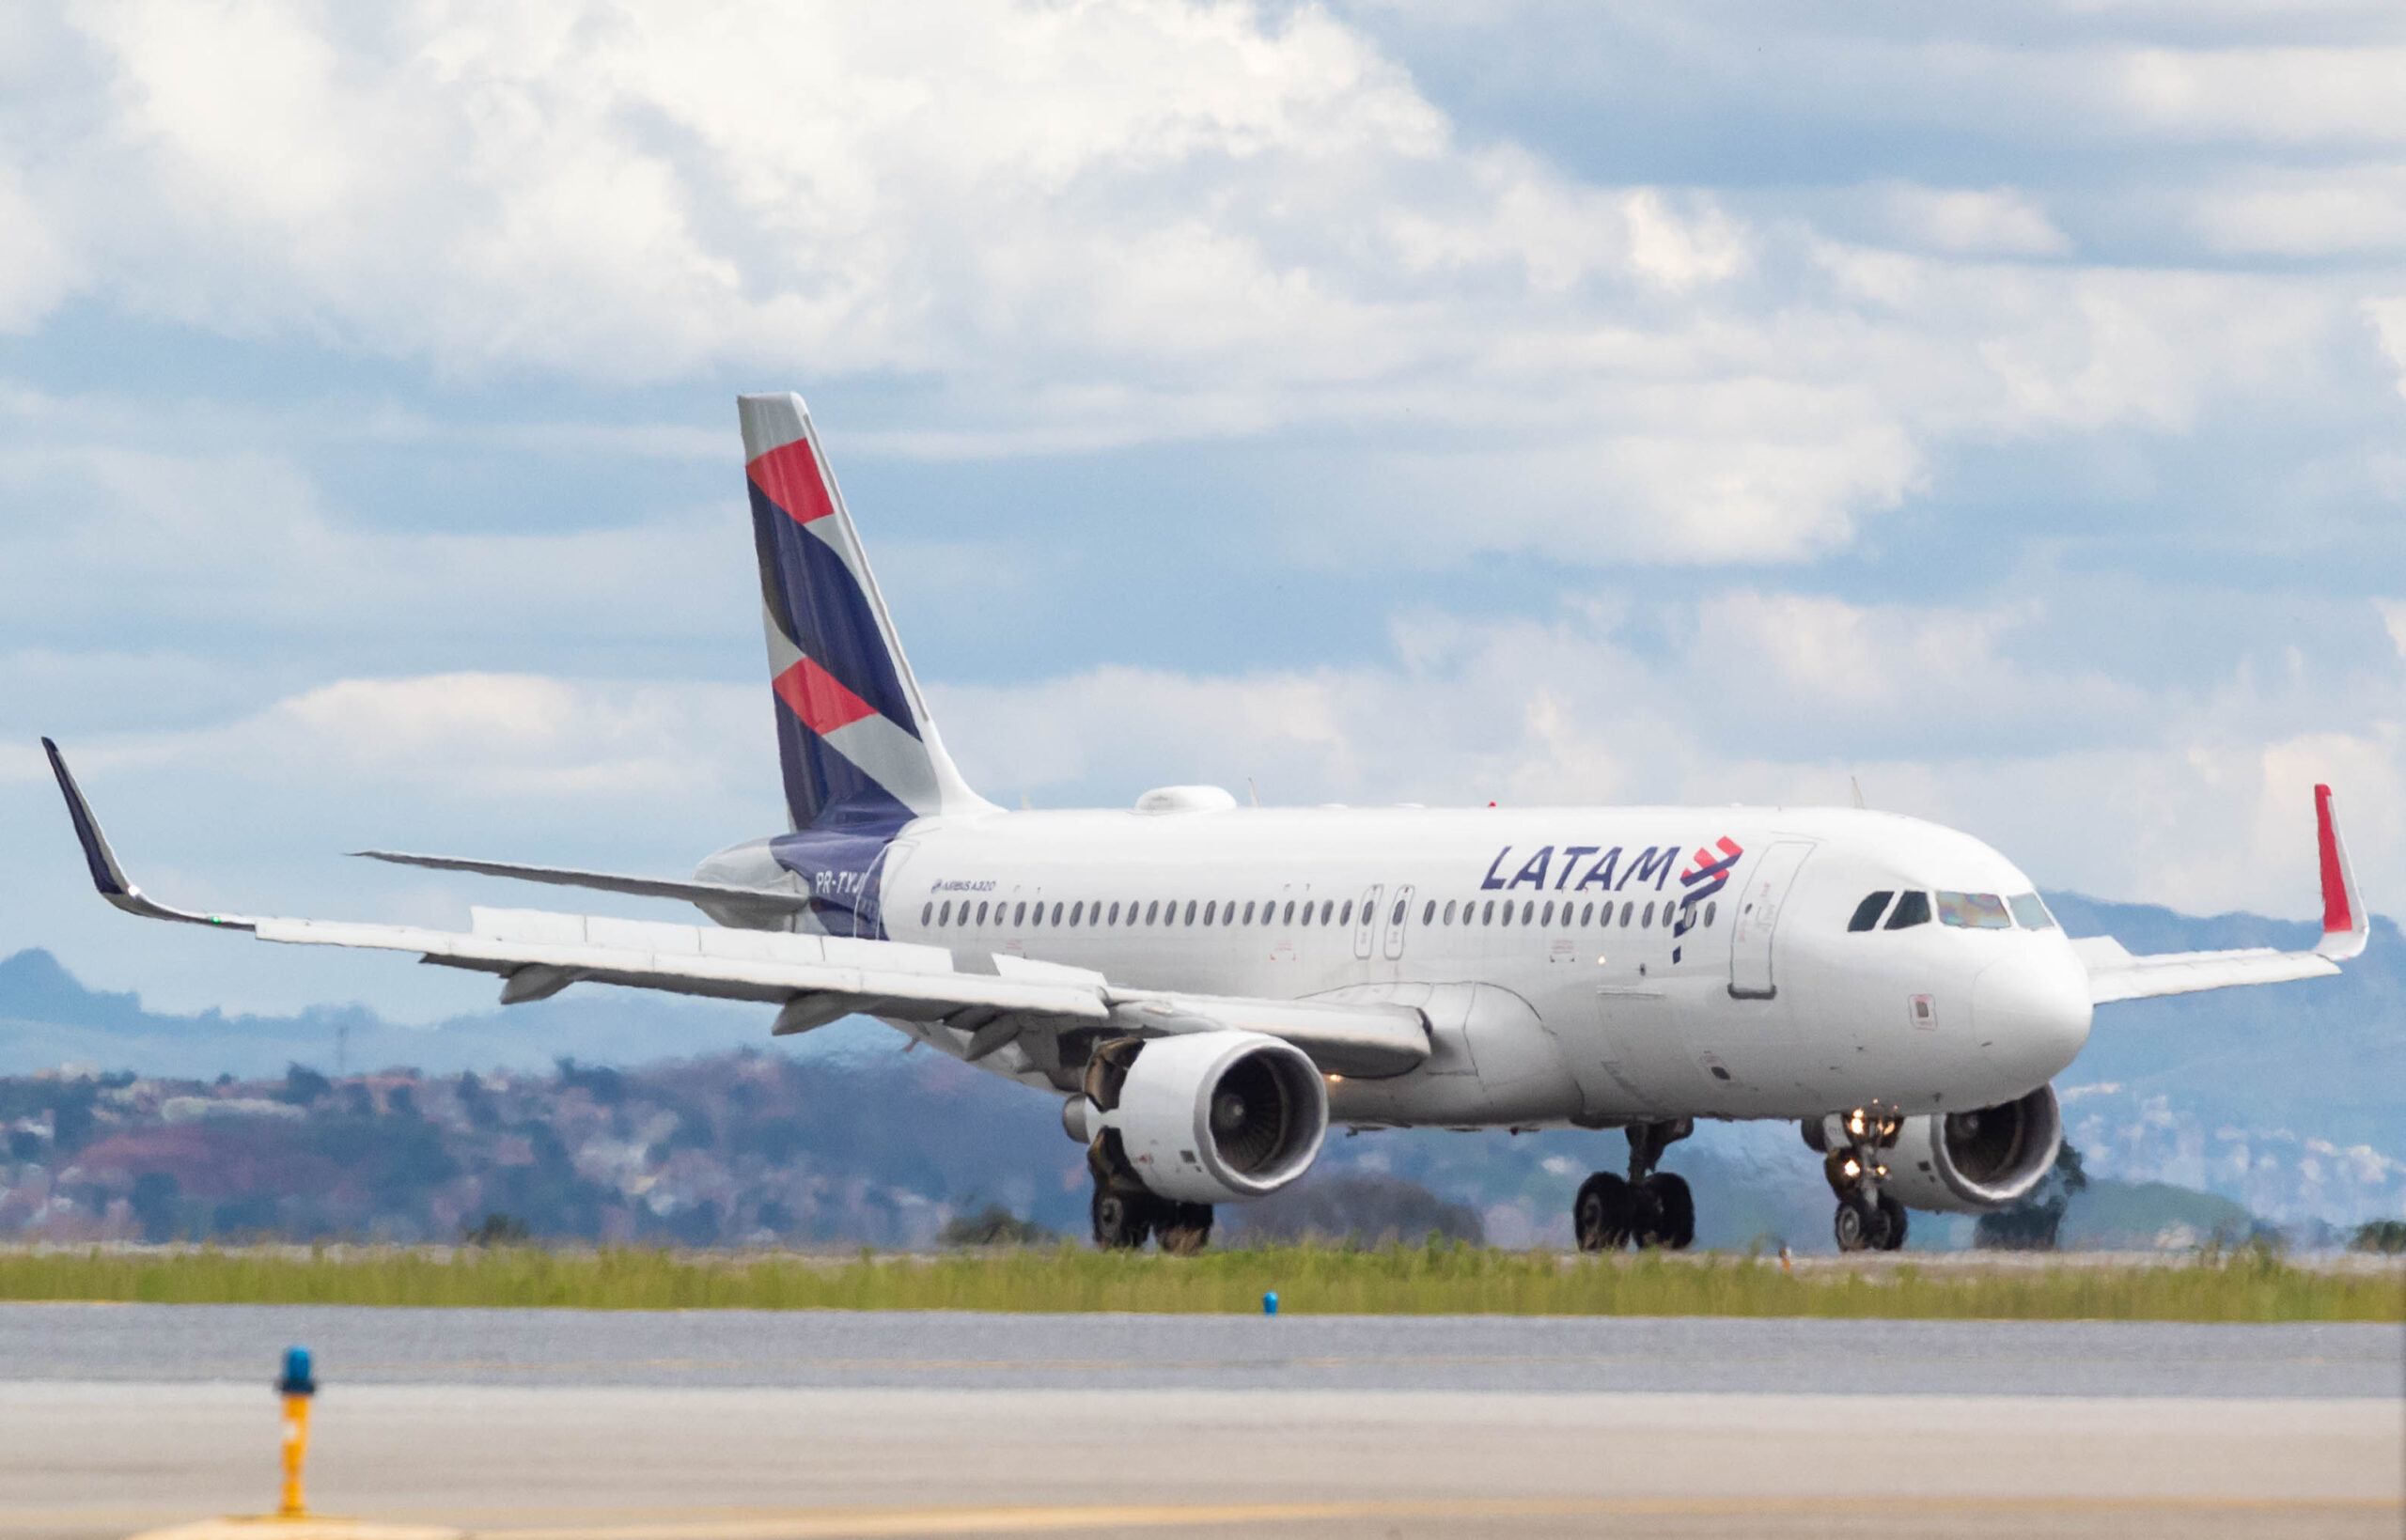 PR-TYJ – Airbus A320-214 WL – LATAM Airlines